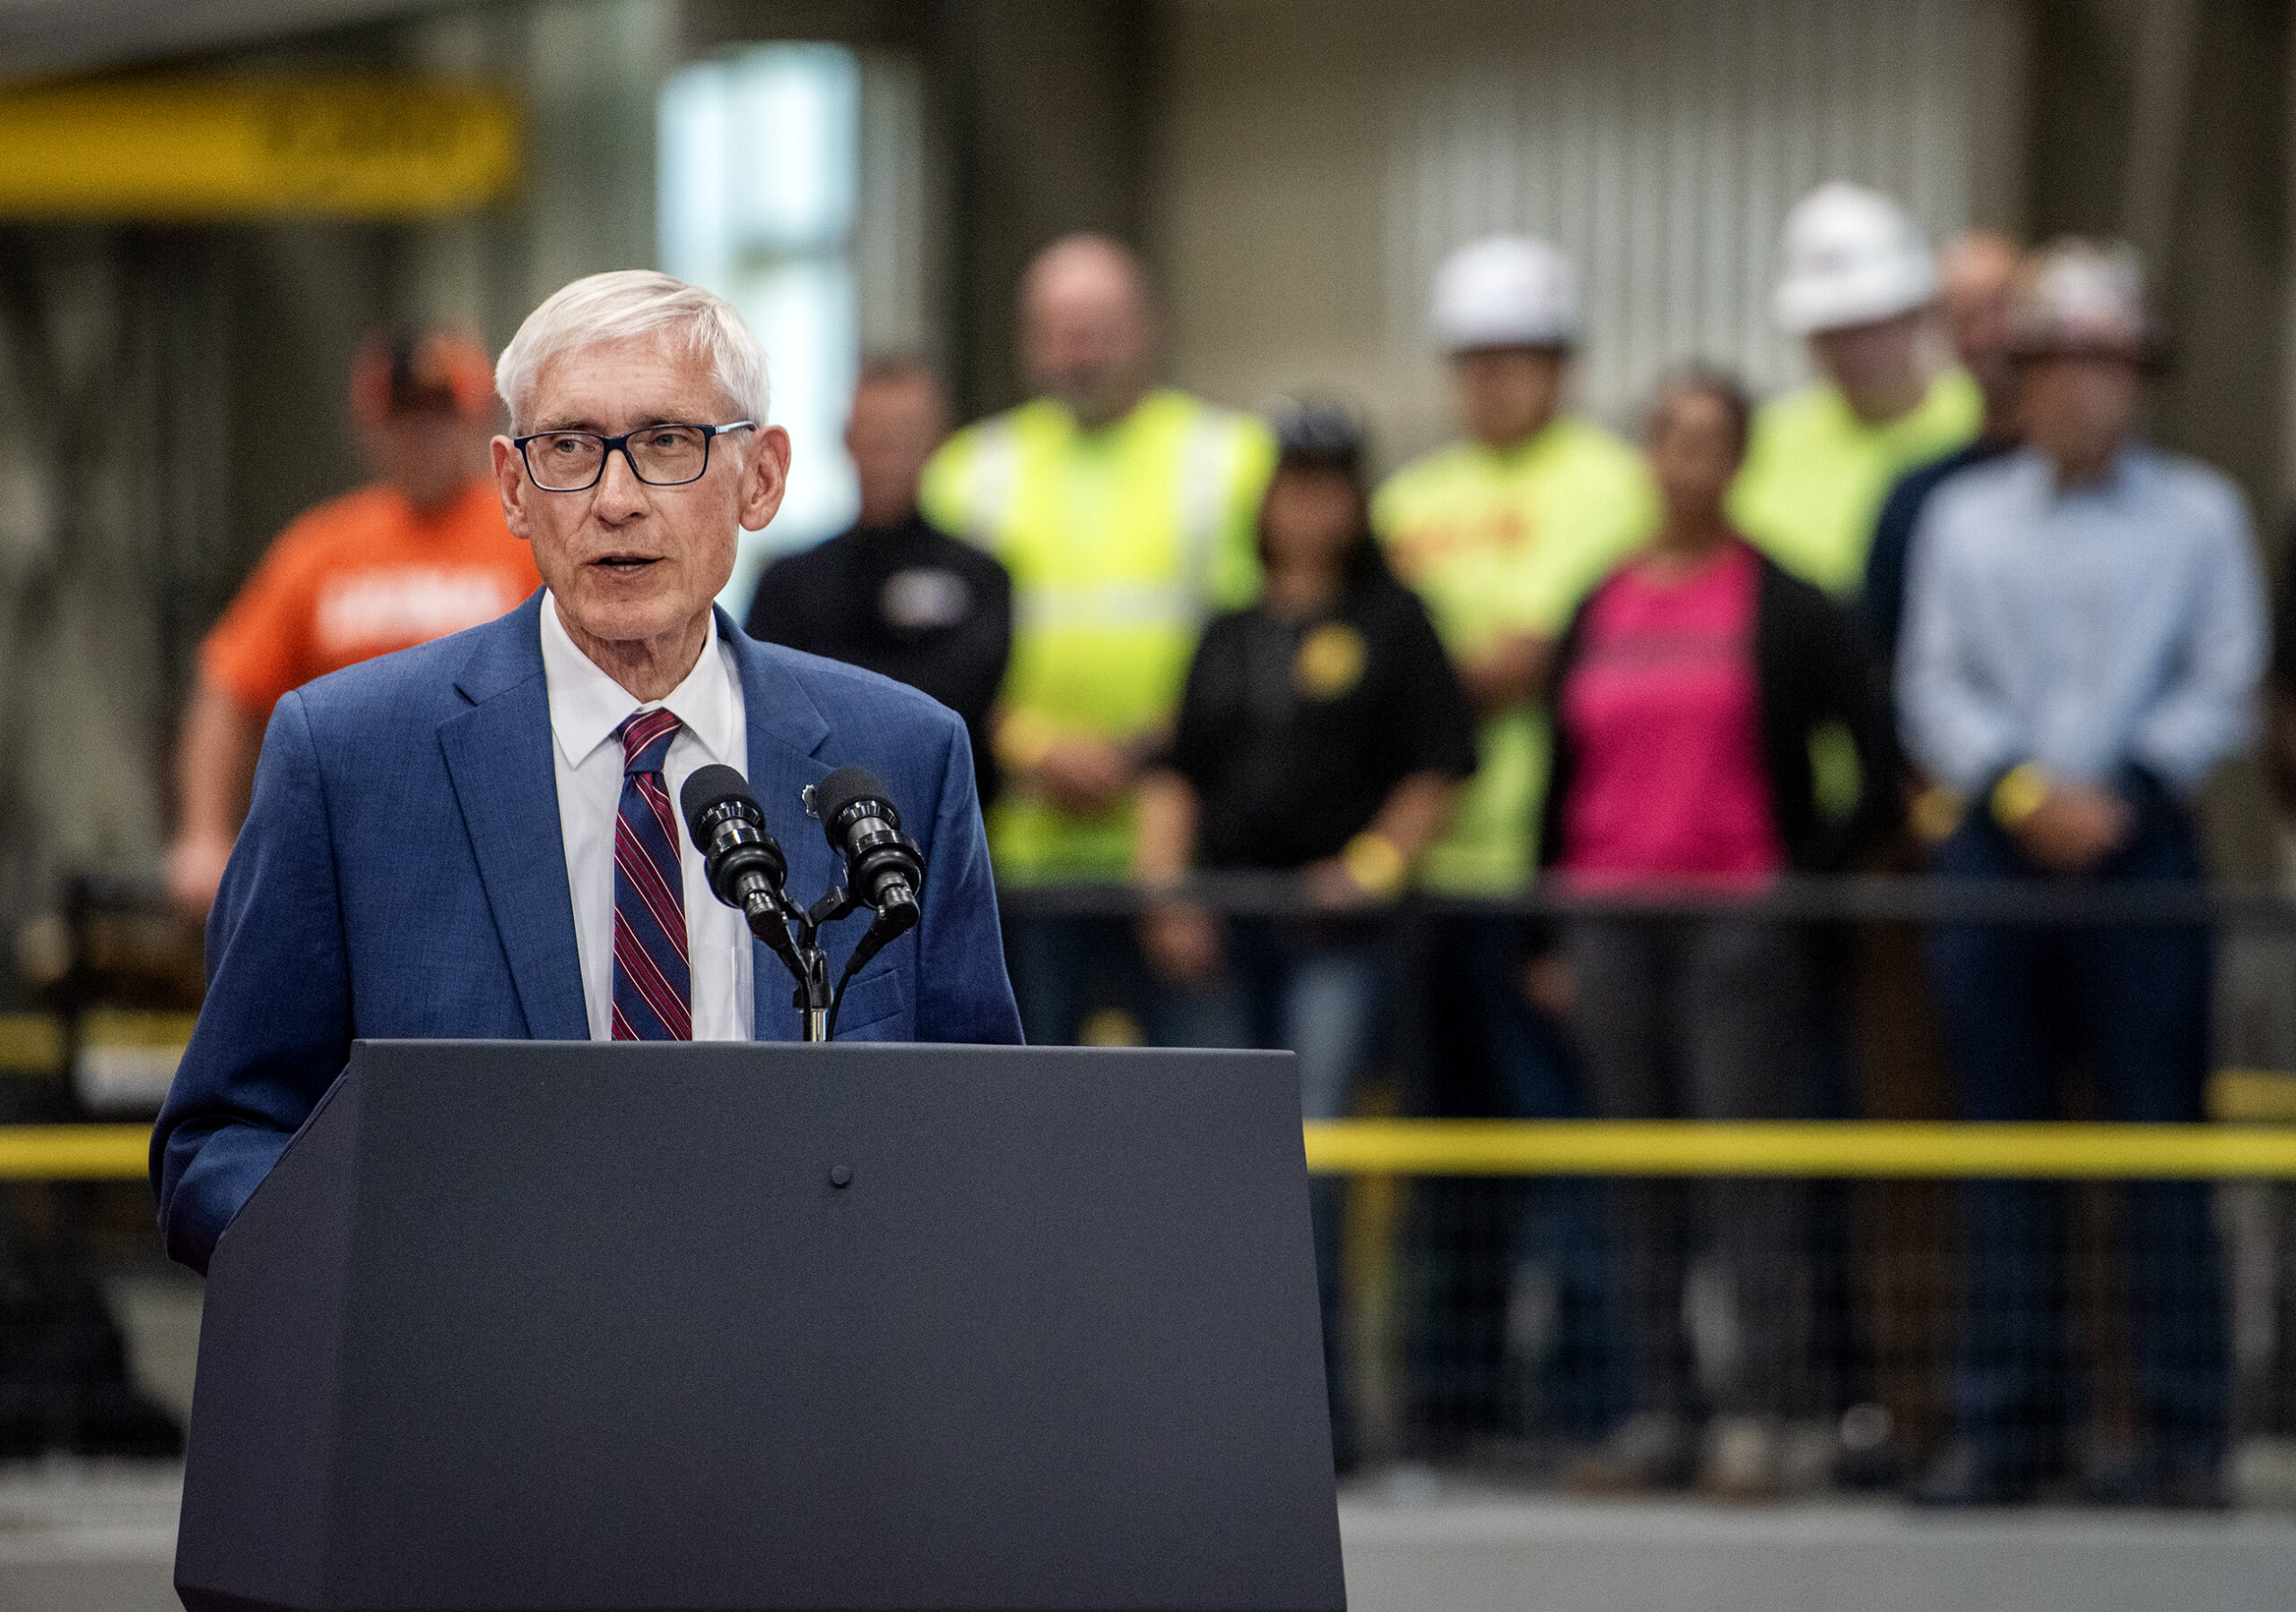 Evers conducted state business in emails using alias of Hall of Fame pitcher